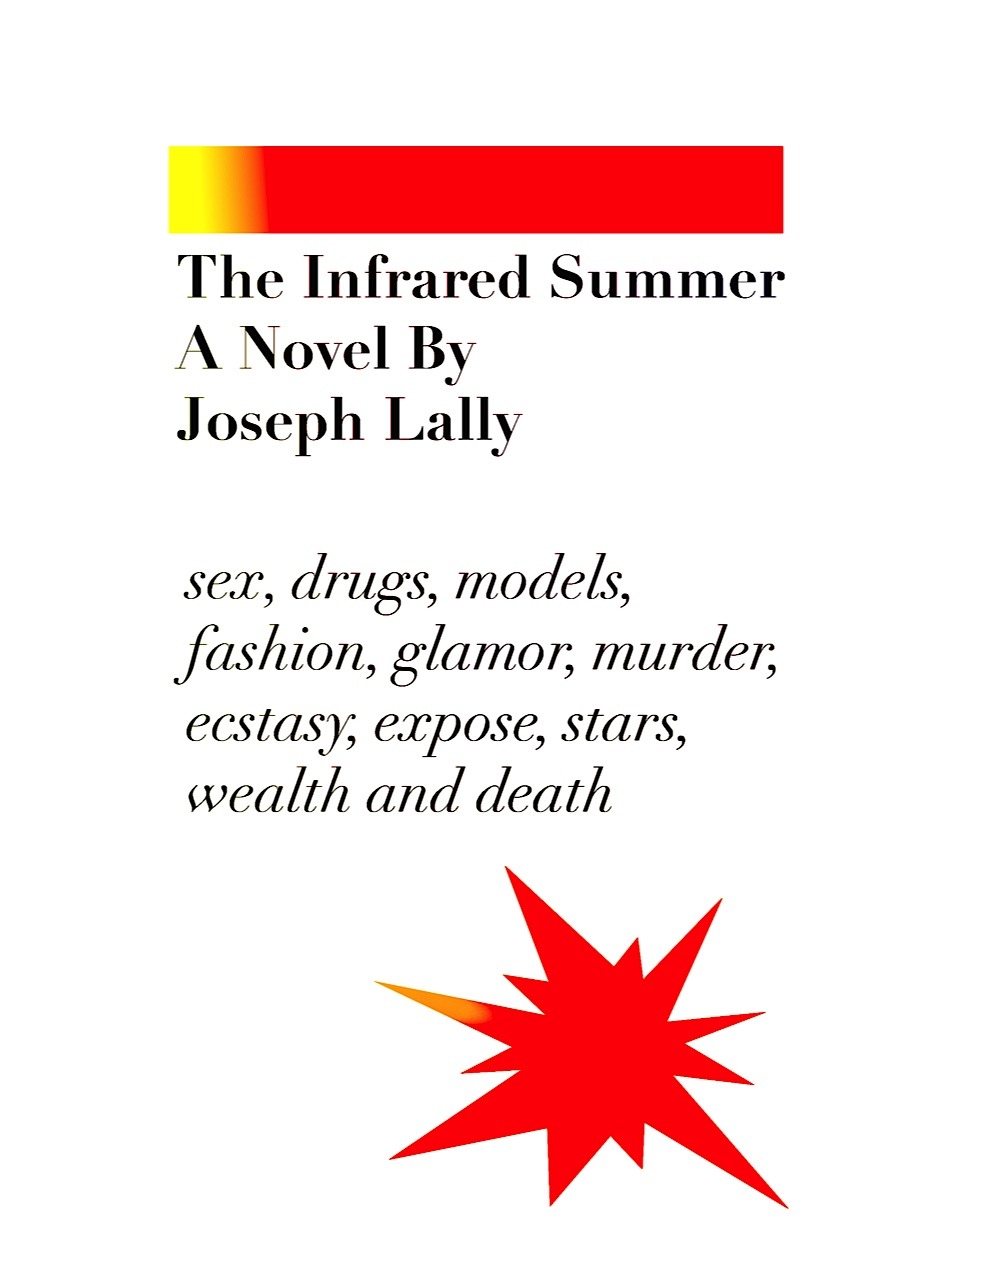 My tell all book can be had here http://www.amazon.com/The-Infrared-Summer-World-Glamor/dp/1508729204